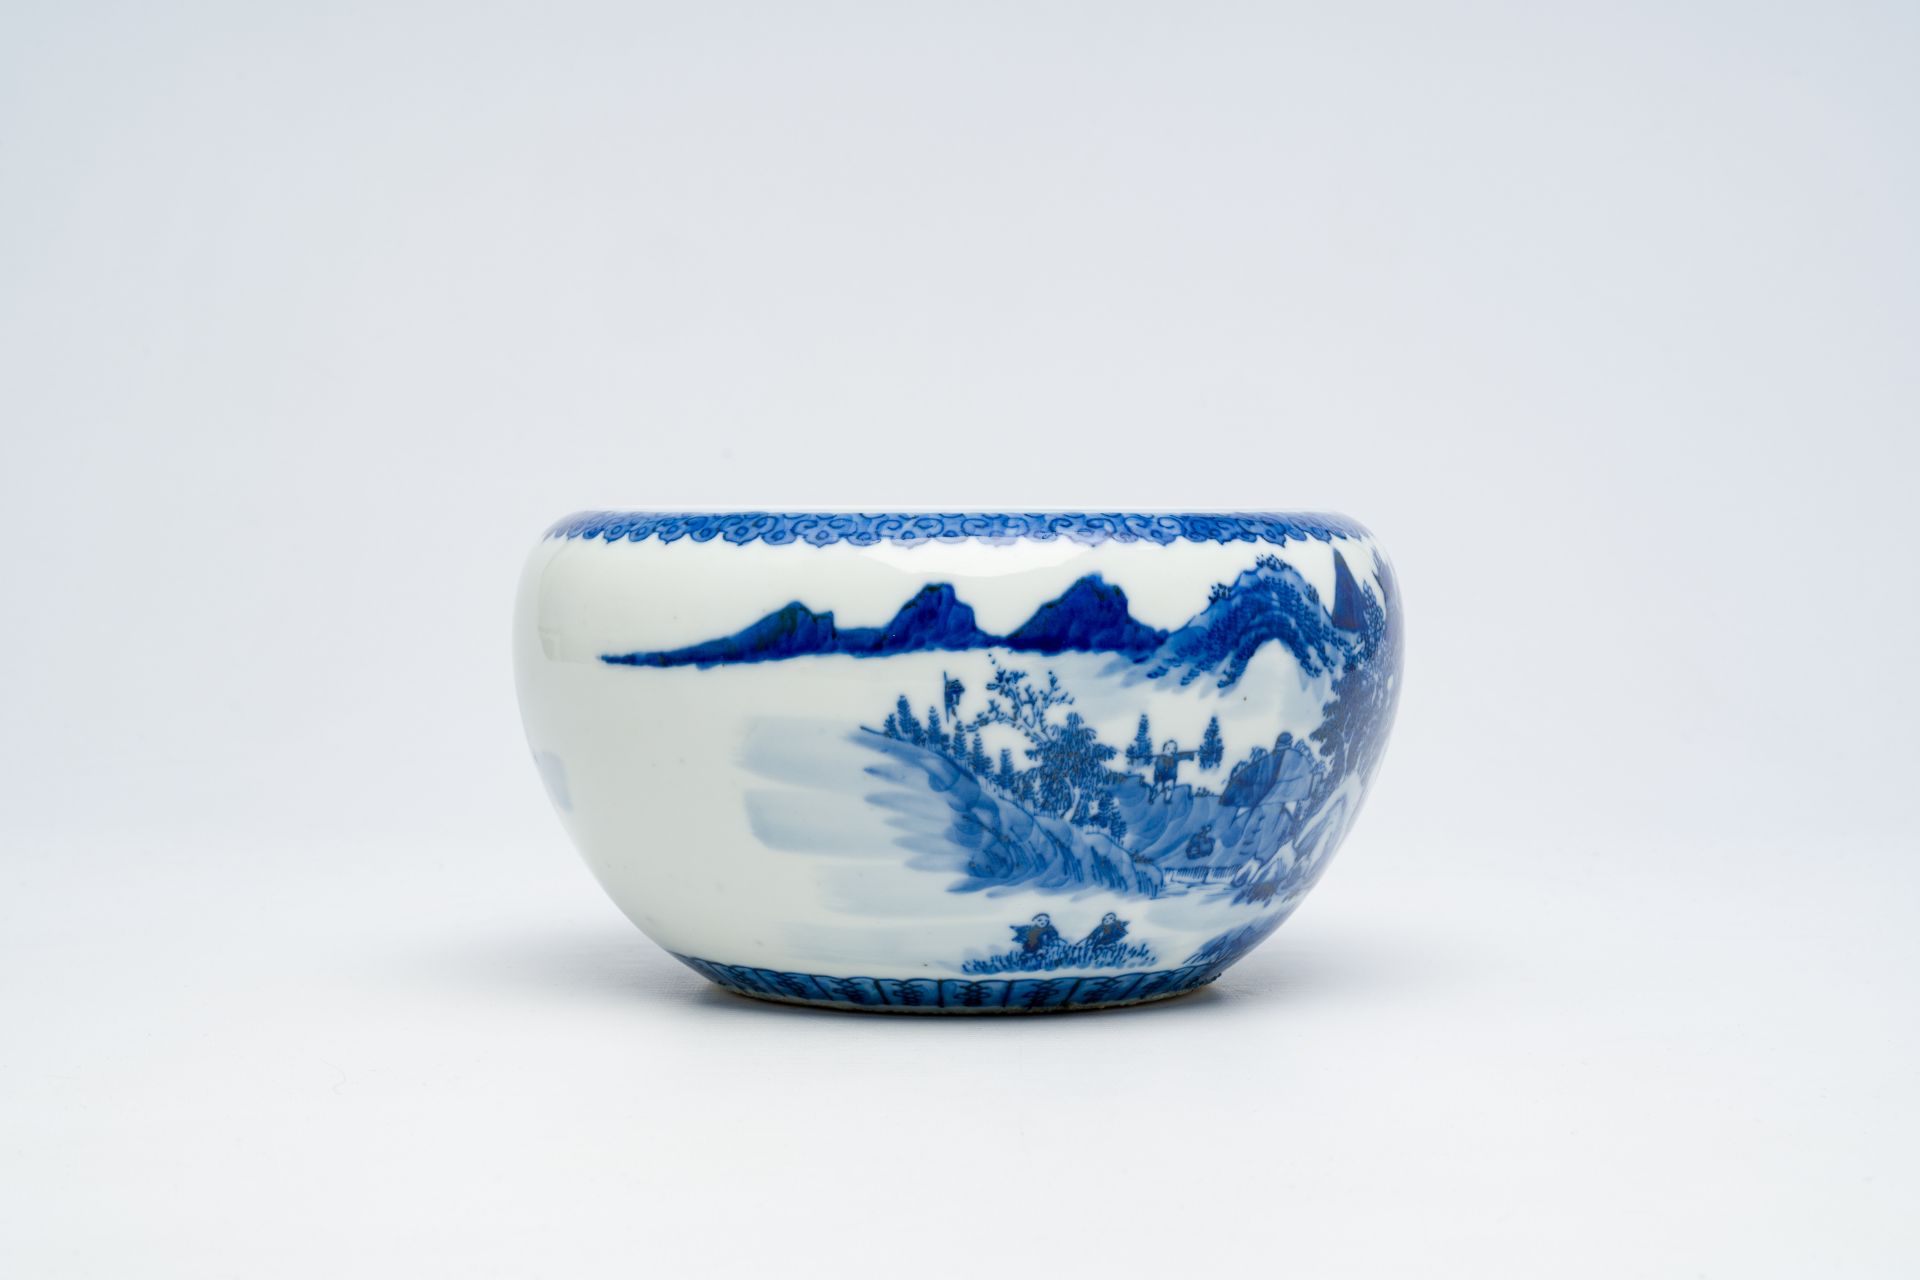 A varied collection of Chinese blue and white porcelain, 19th/20th C. - Image 25 of 30